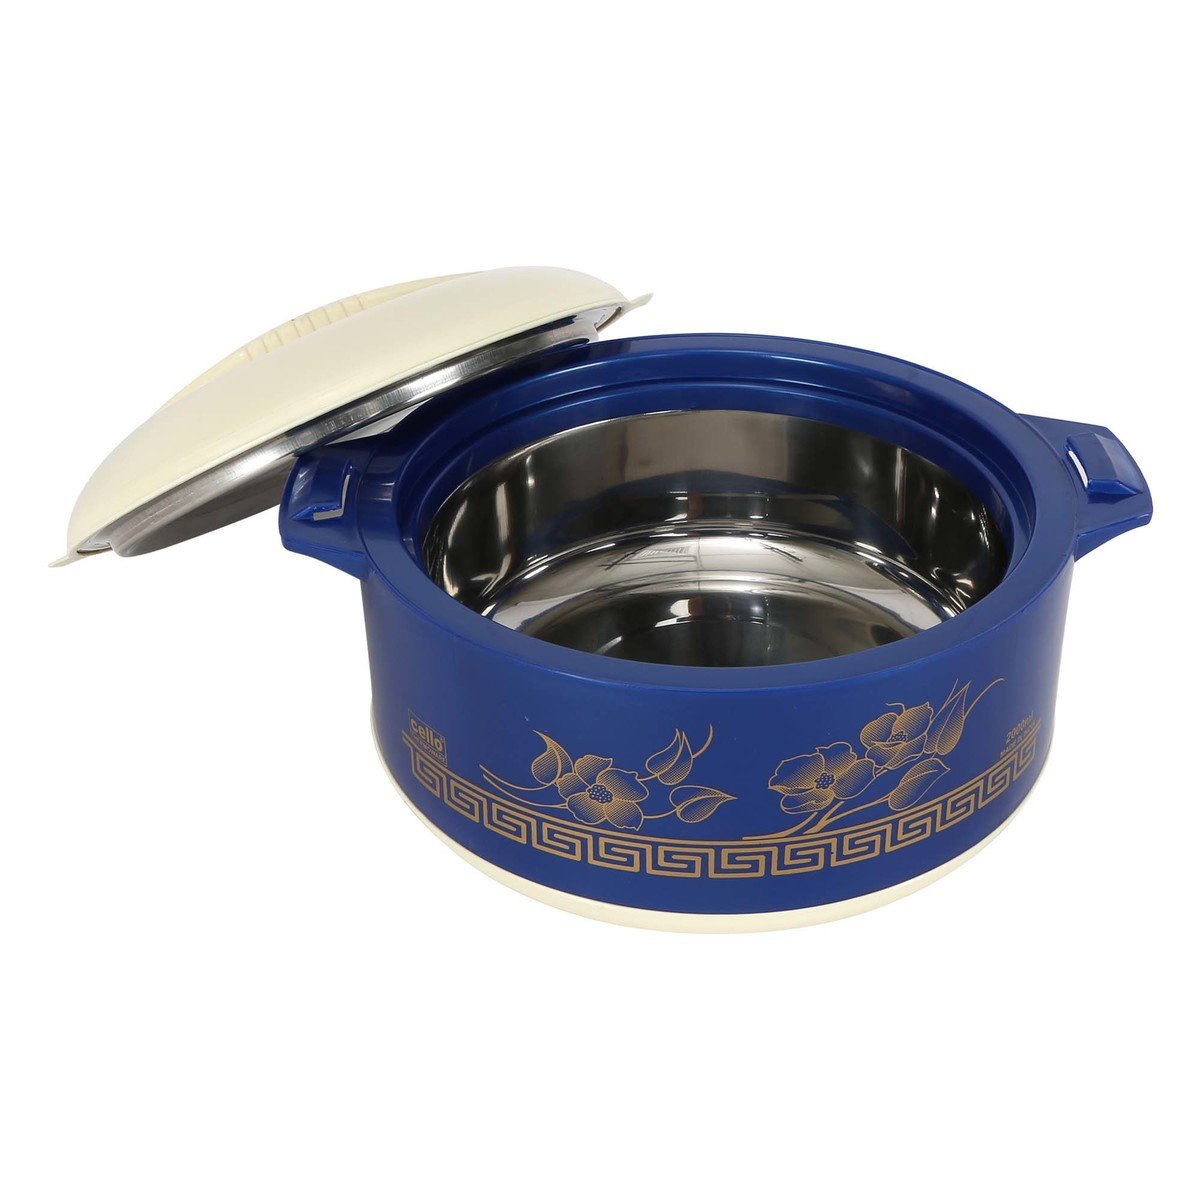 Cello Hot Pot Chef Deluxe 2Ltr Assorted Colors